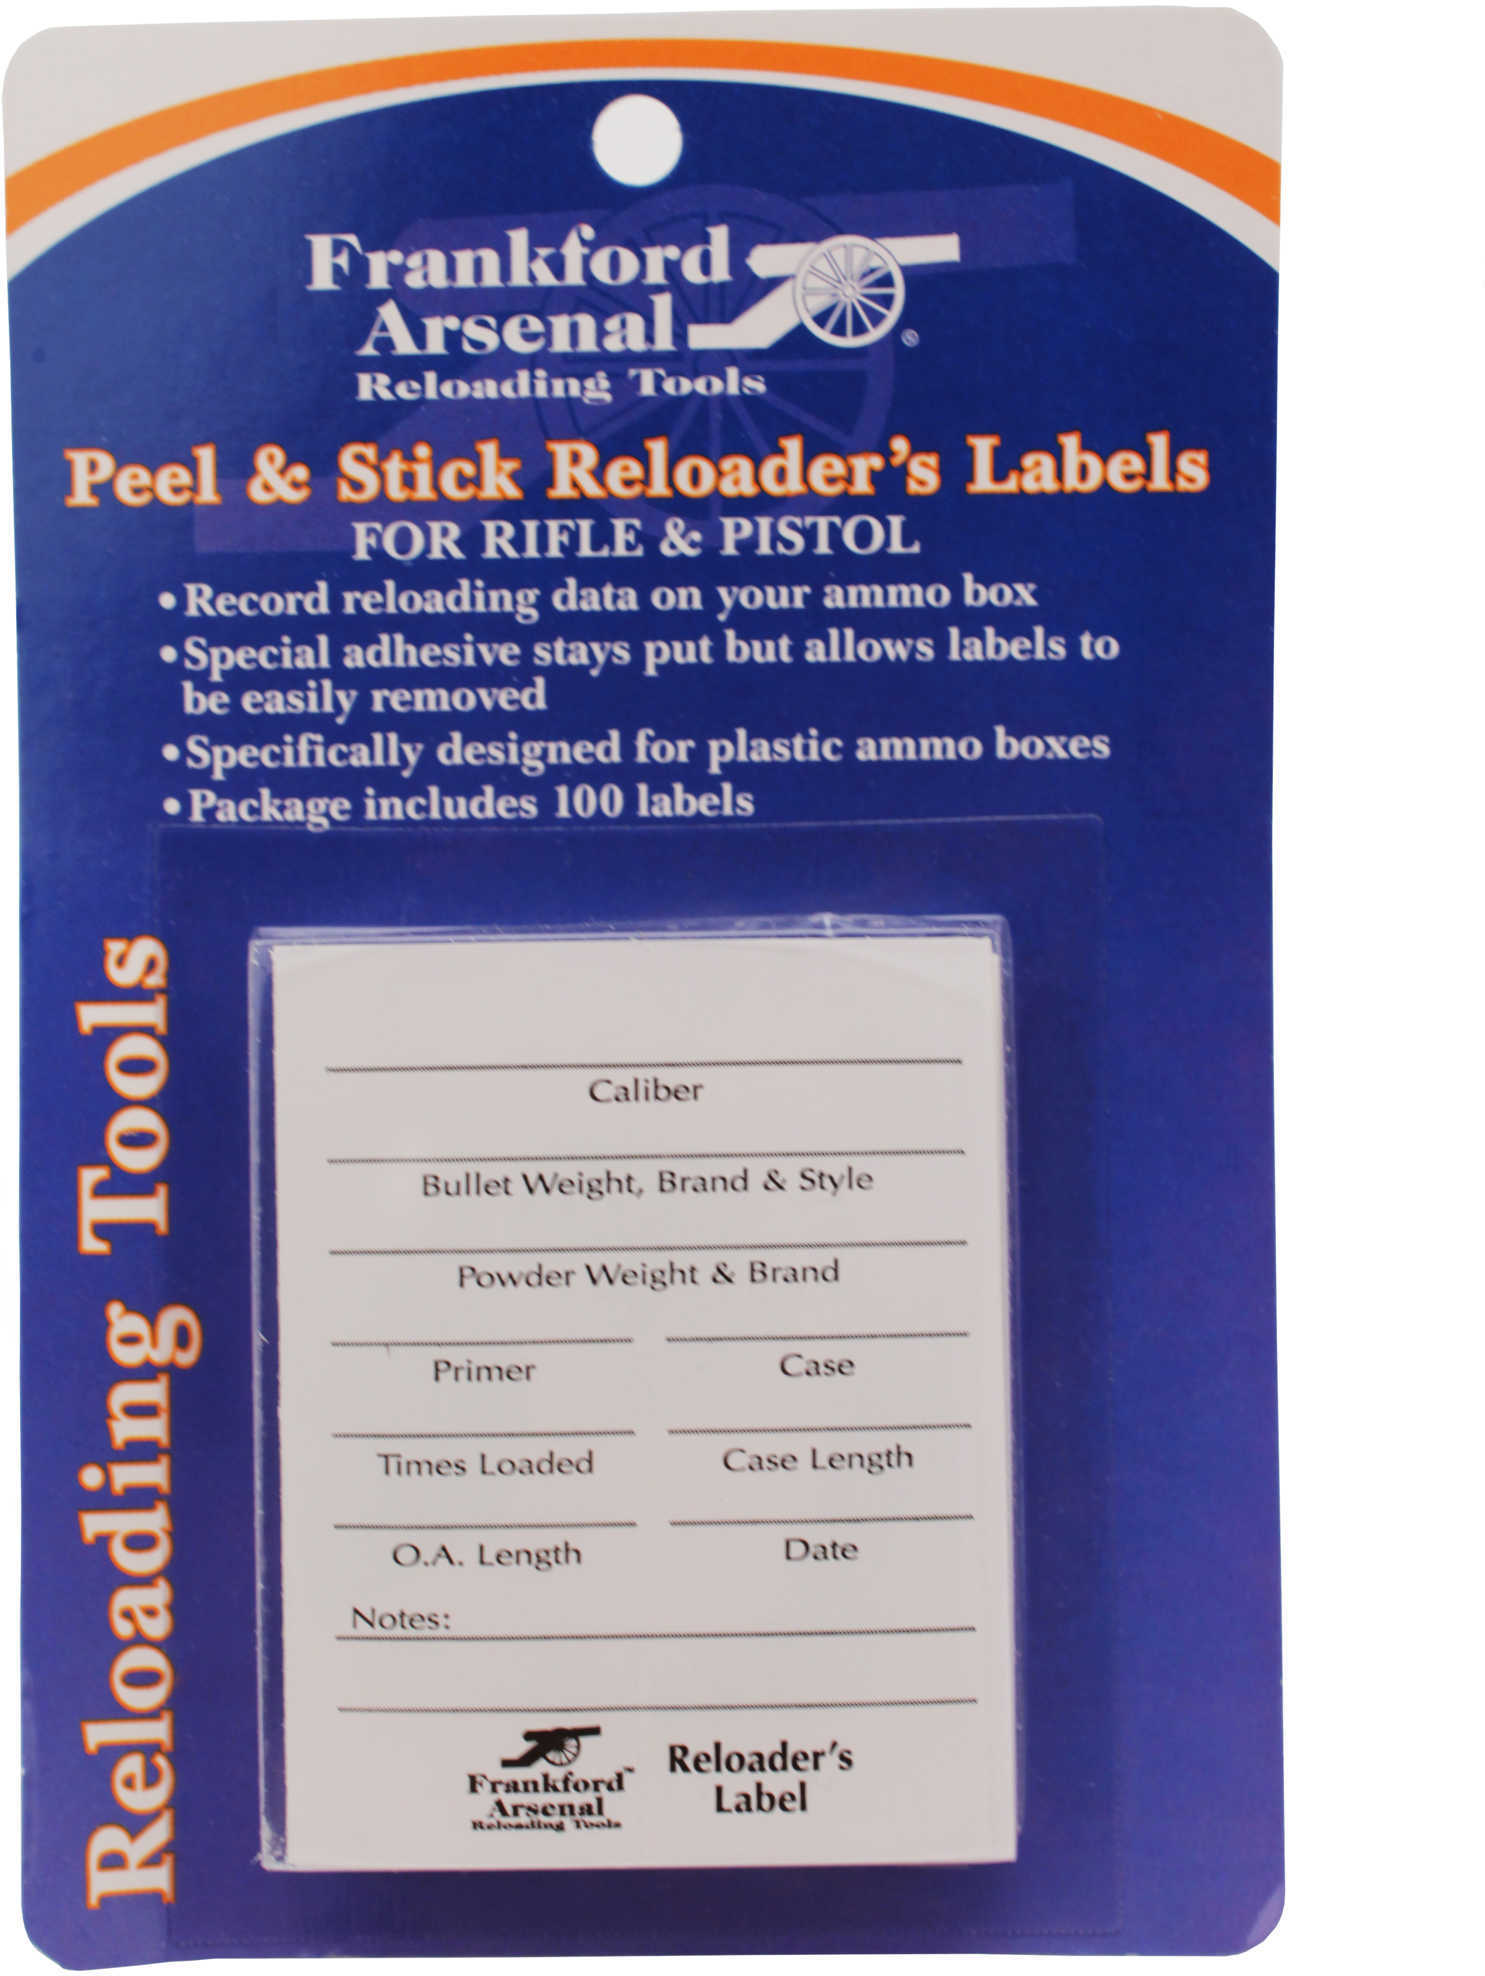 Frankford Arsenal Pistol and Rifle Reloader's Labels 100 Pack 202364